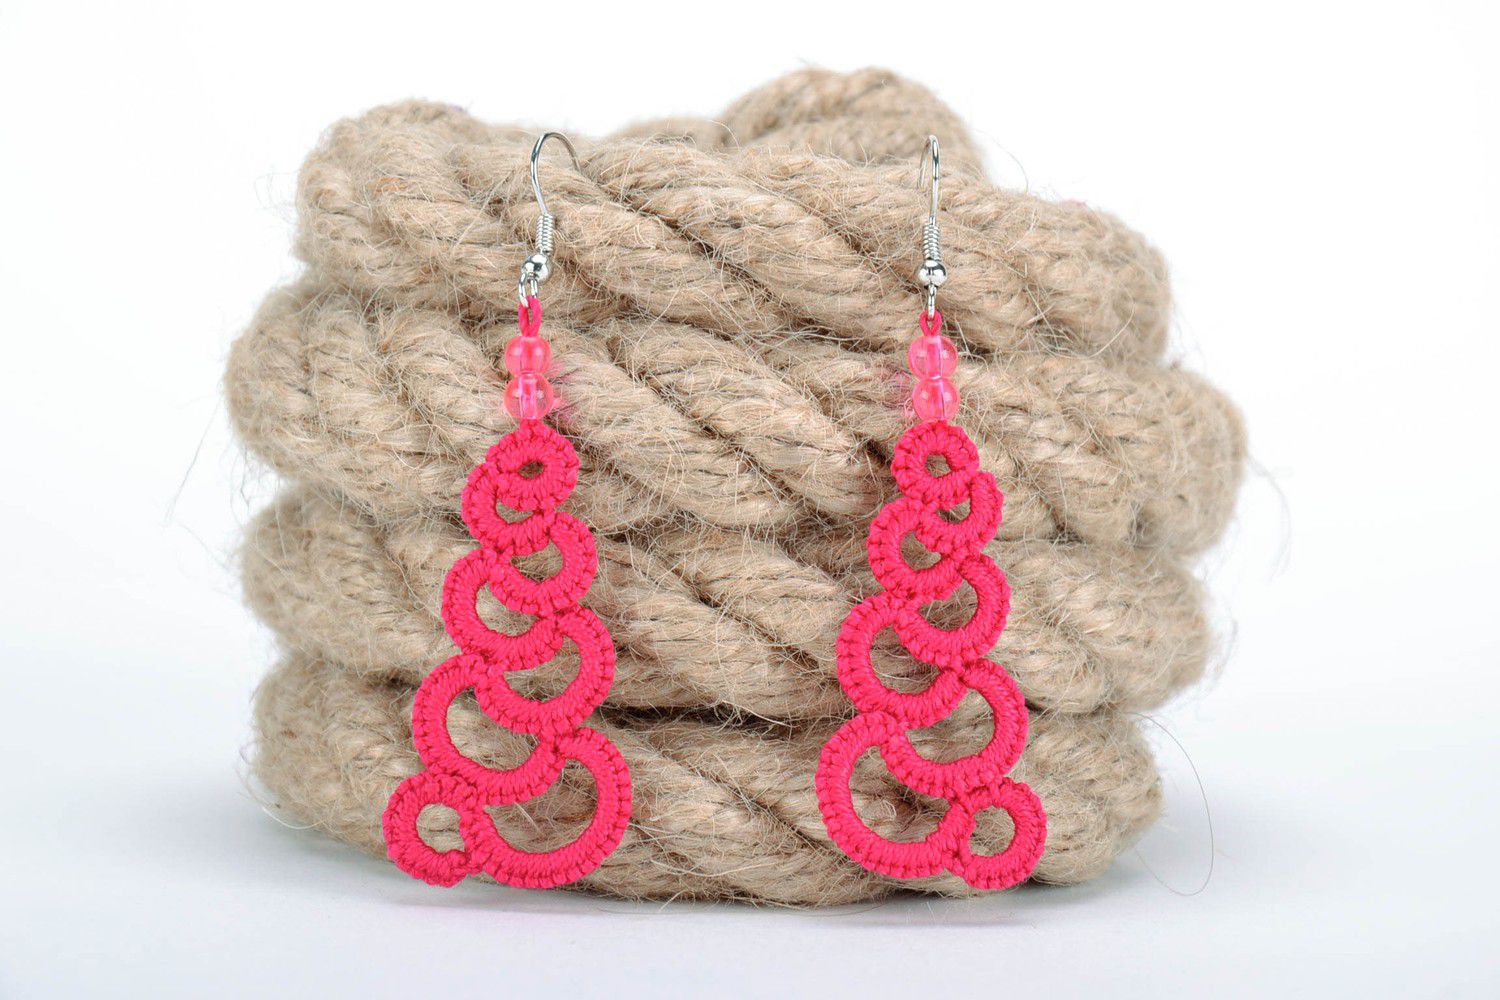 Crimson earrings made from woven lace photo 2